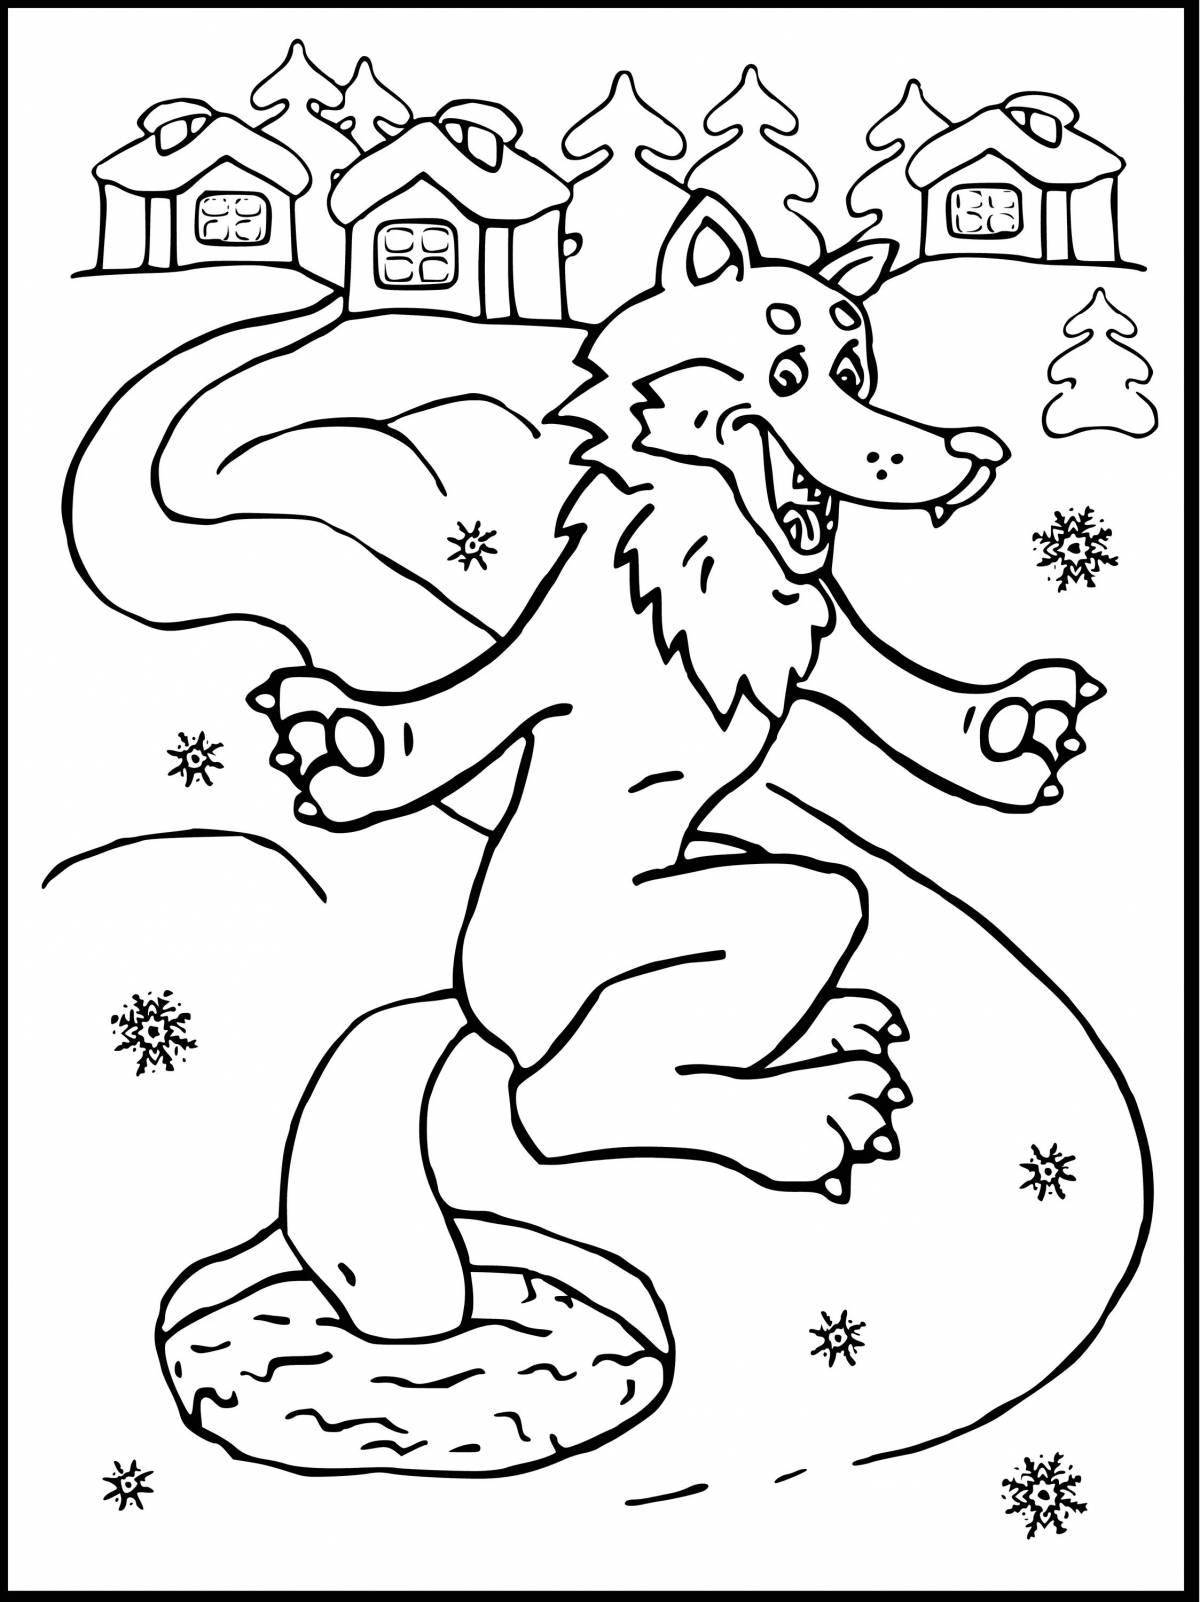 Coloring book shiny gray winter wolf